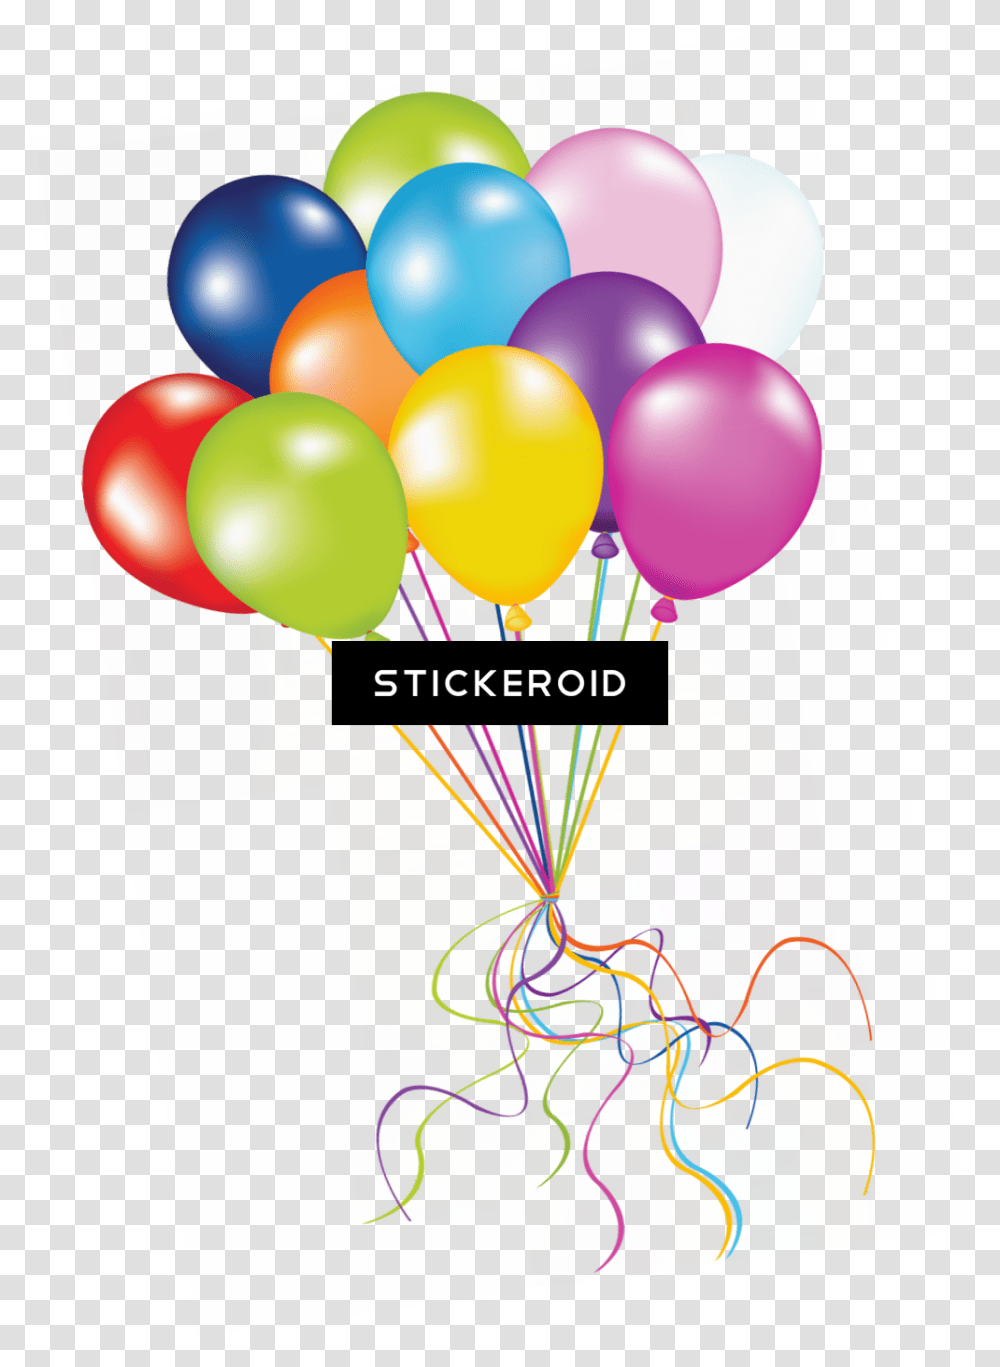 Background Cartoon Birthday Balloons Hd Balloons Hd Download, Poster, Advertisement, Flyer, Paper Transparent Png